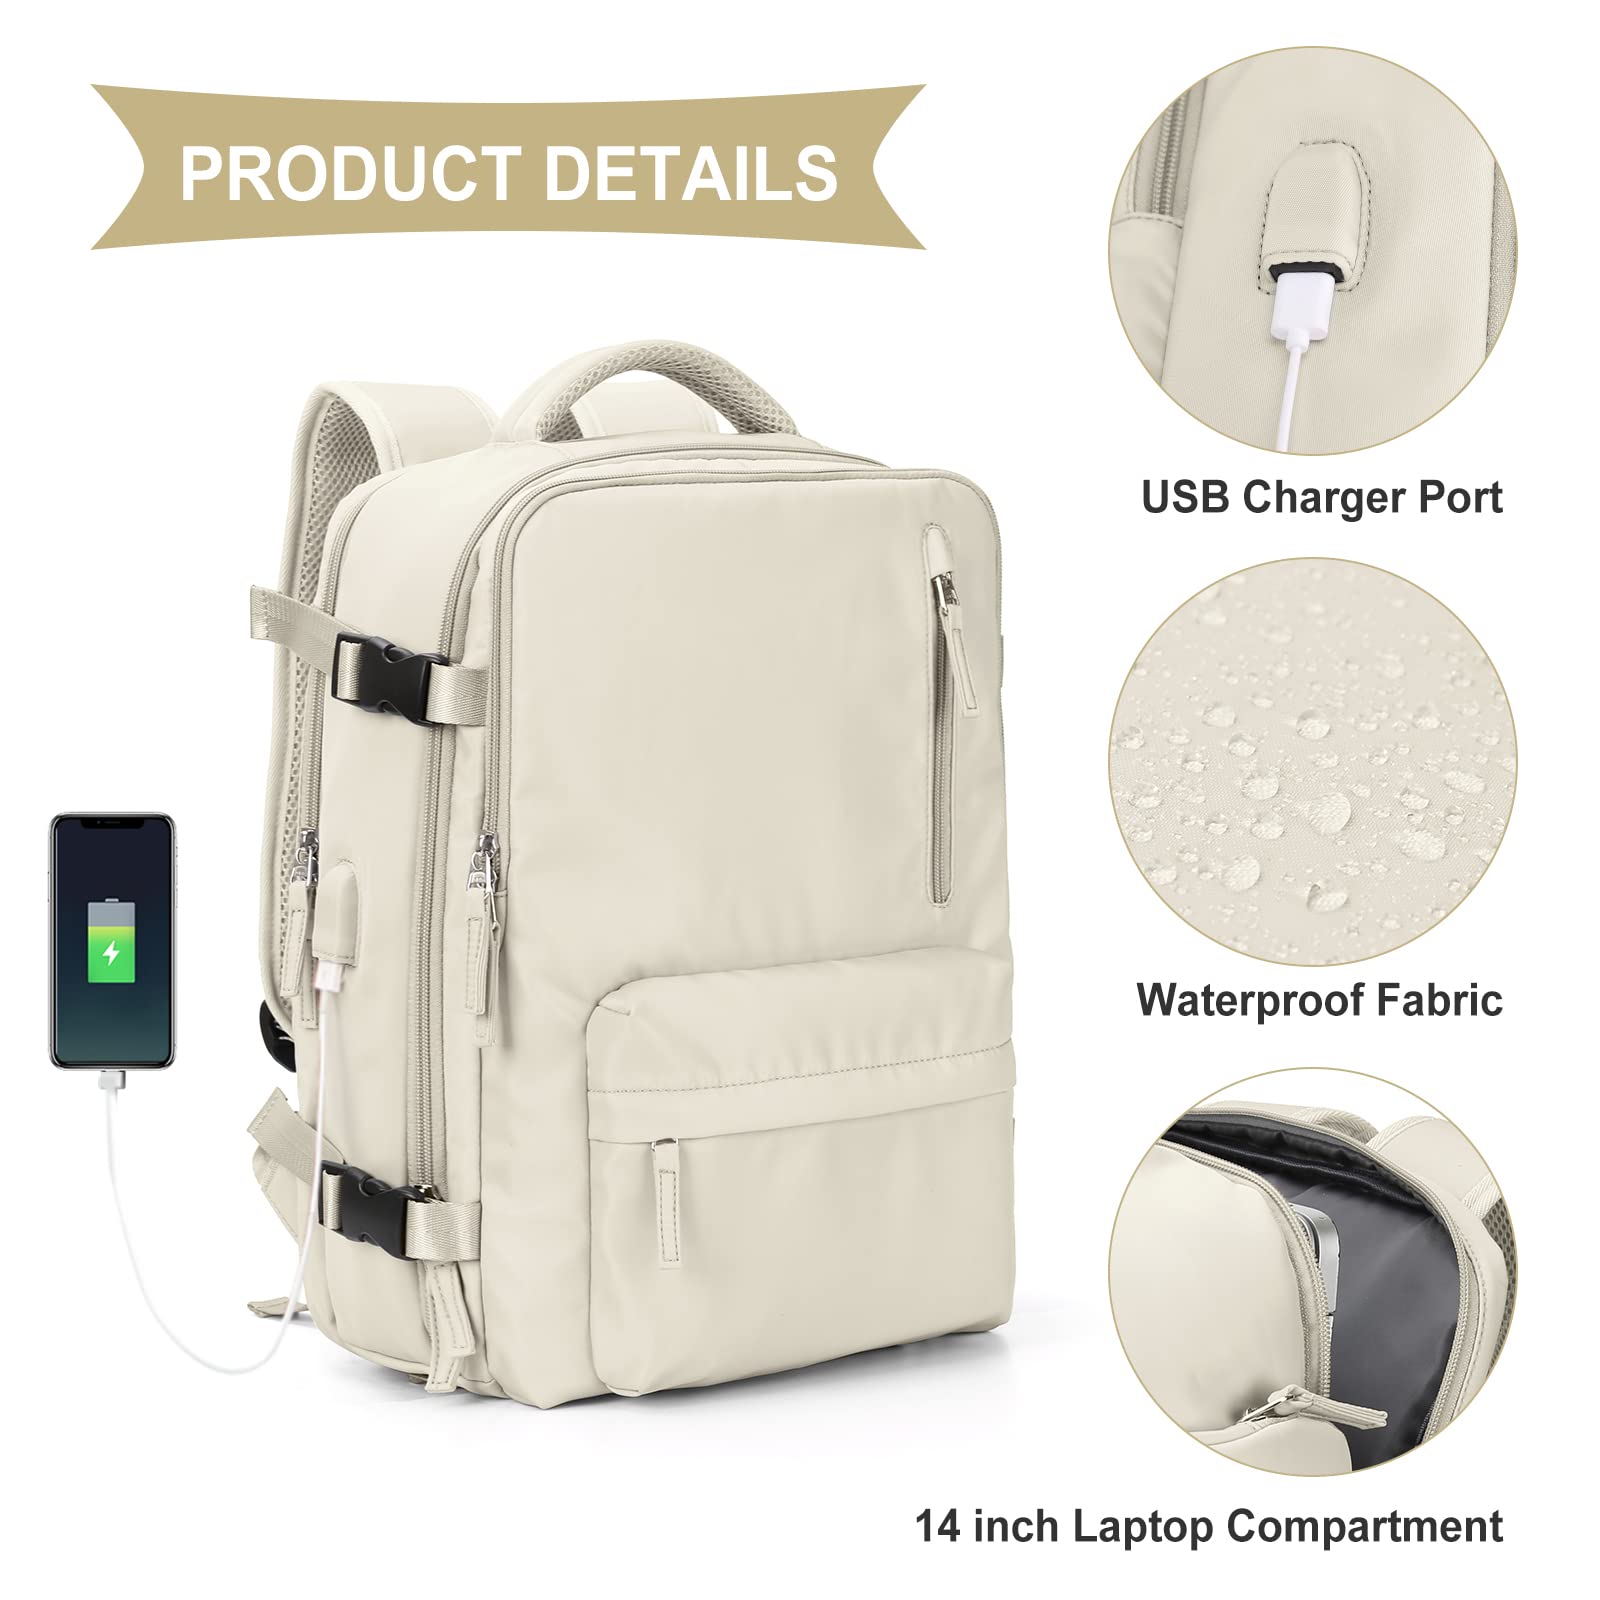 Large Travel Backpack Women, Carry On Backpack,Hiking Backpack Waterproof Outdoor Sports Rucksack Casual Daypack Fit 14 Inch Laptop with USB Charging Port Shoes Compartment, Beige